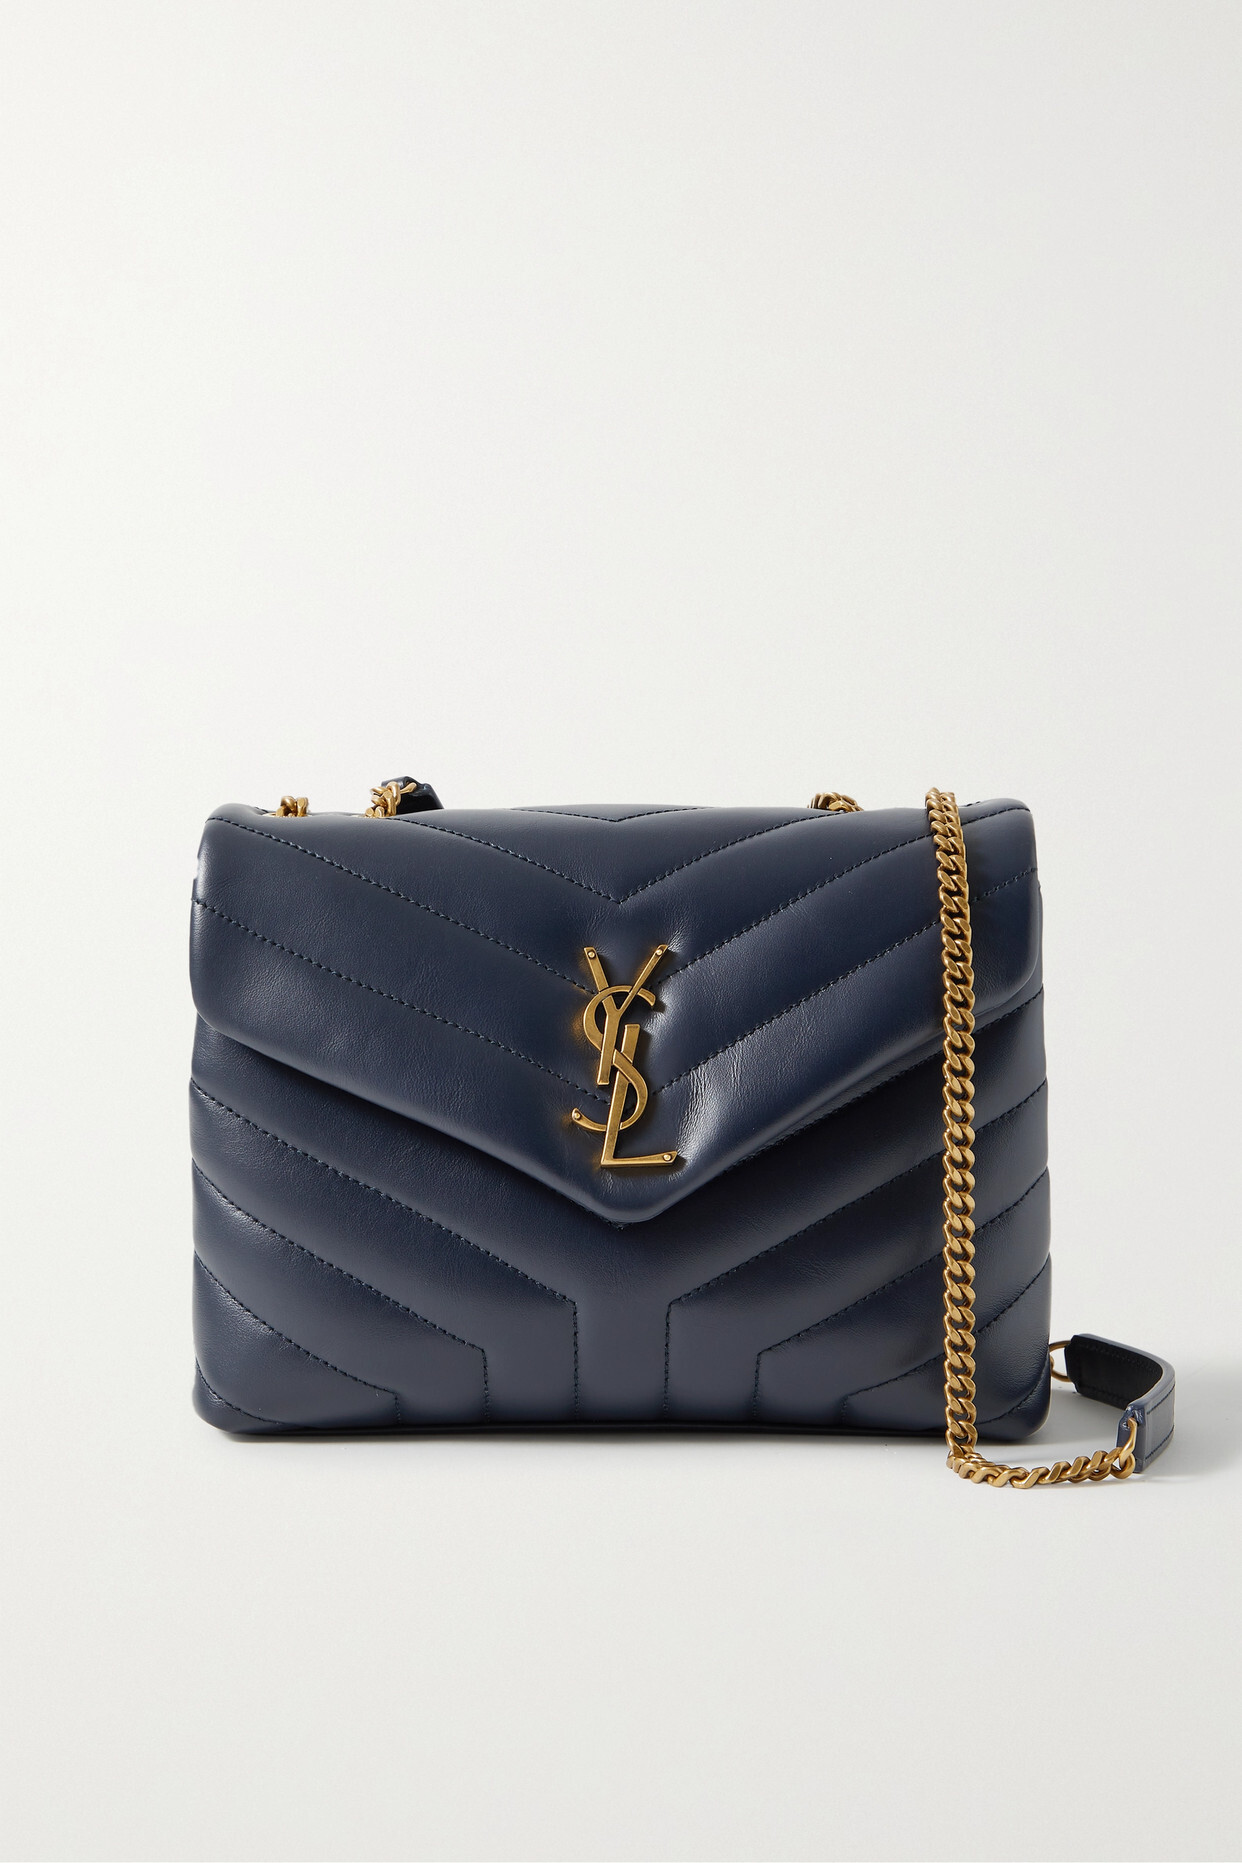 SAINT LAURENT - Loulou Small Quilted Leather Shoulder Bag - Blue